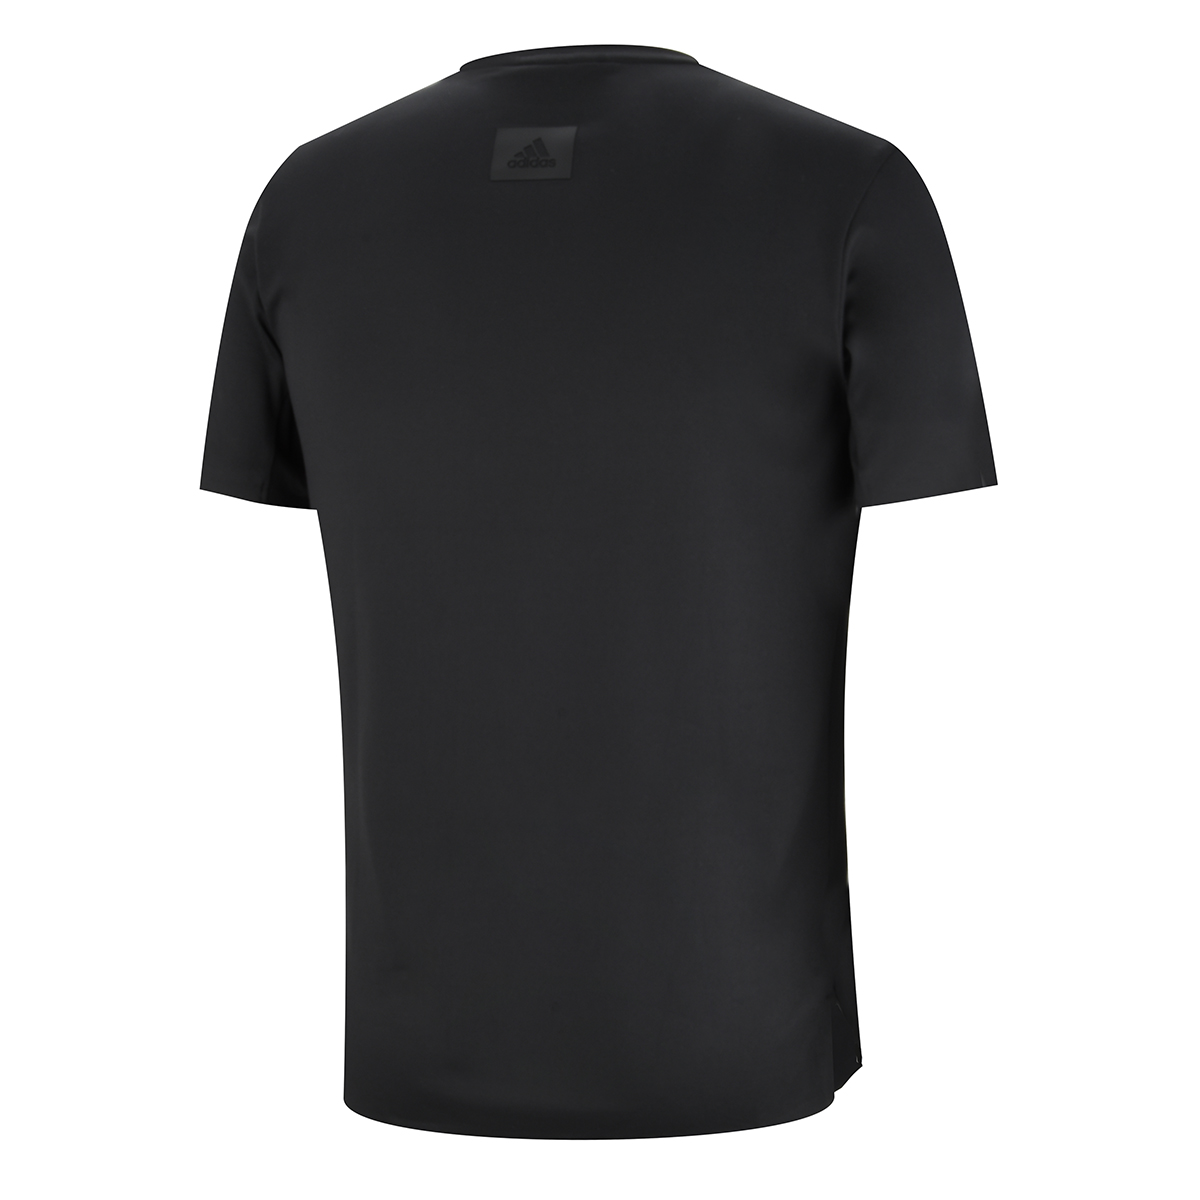 Remera Entrenamiento adidas Best Of adidas Hombre,  image number null